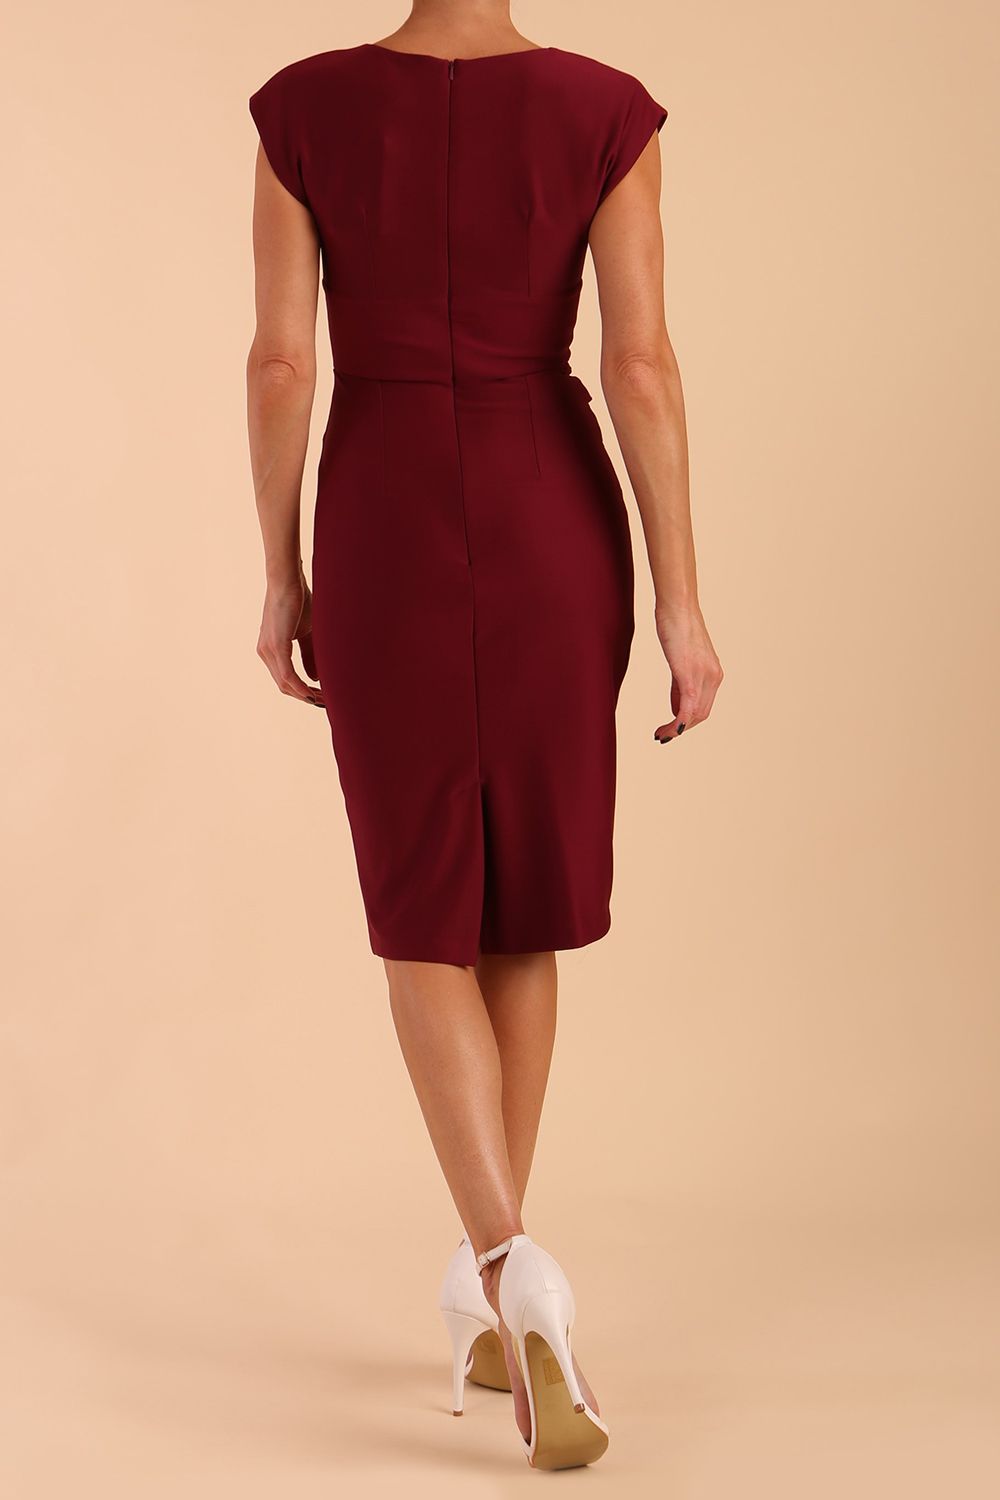 model wearing diva catwalk daphne sleeveless magenta haze pencil dress with rounded neckline with split in the middle in blissful burgundy back